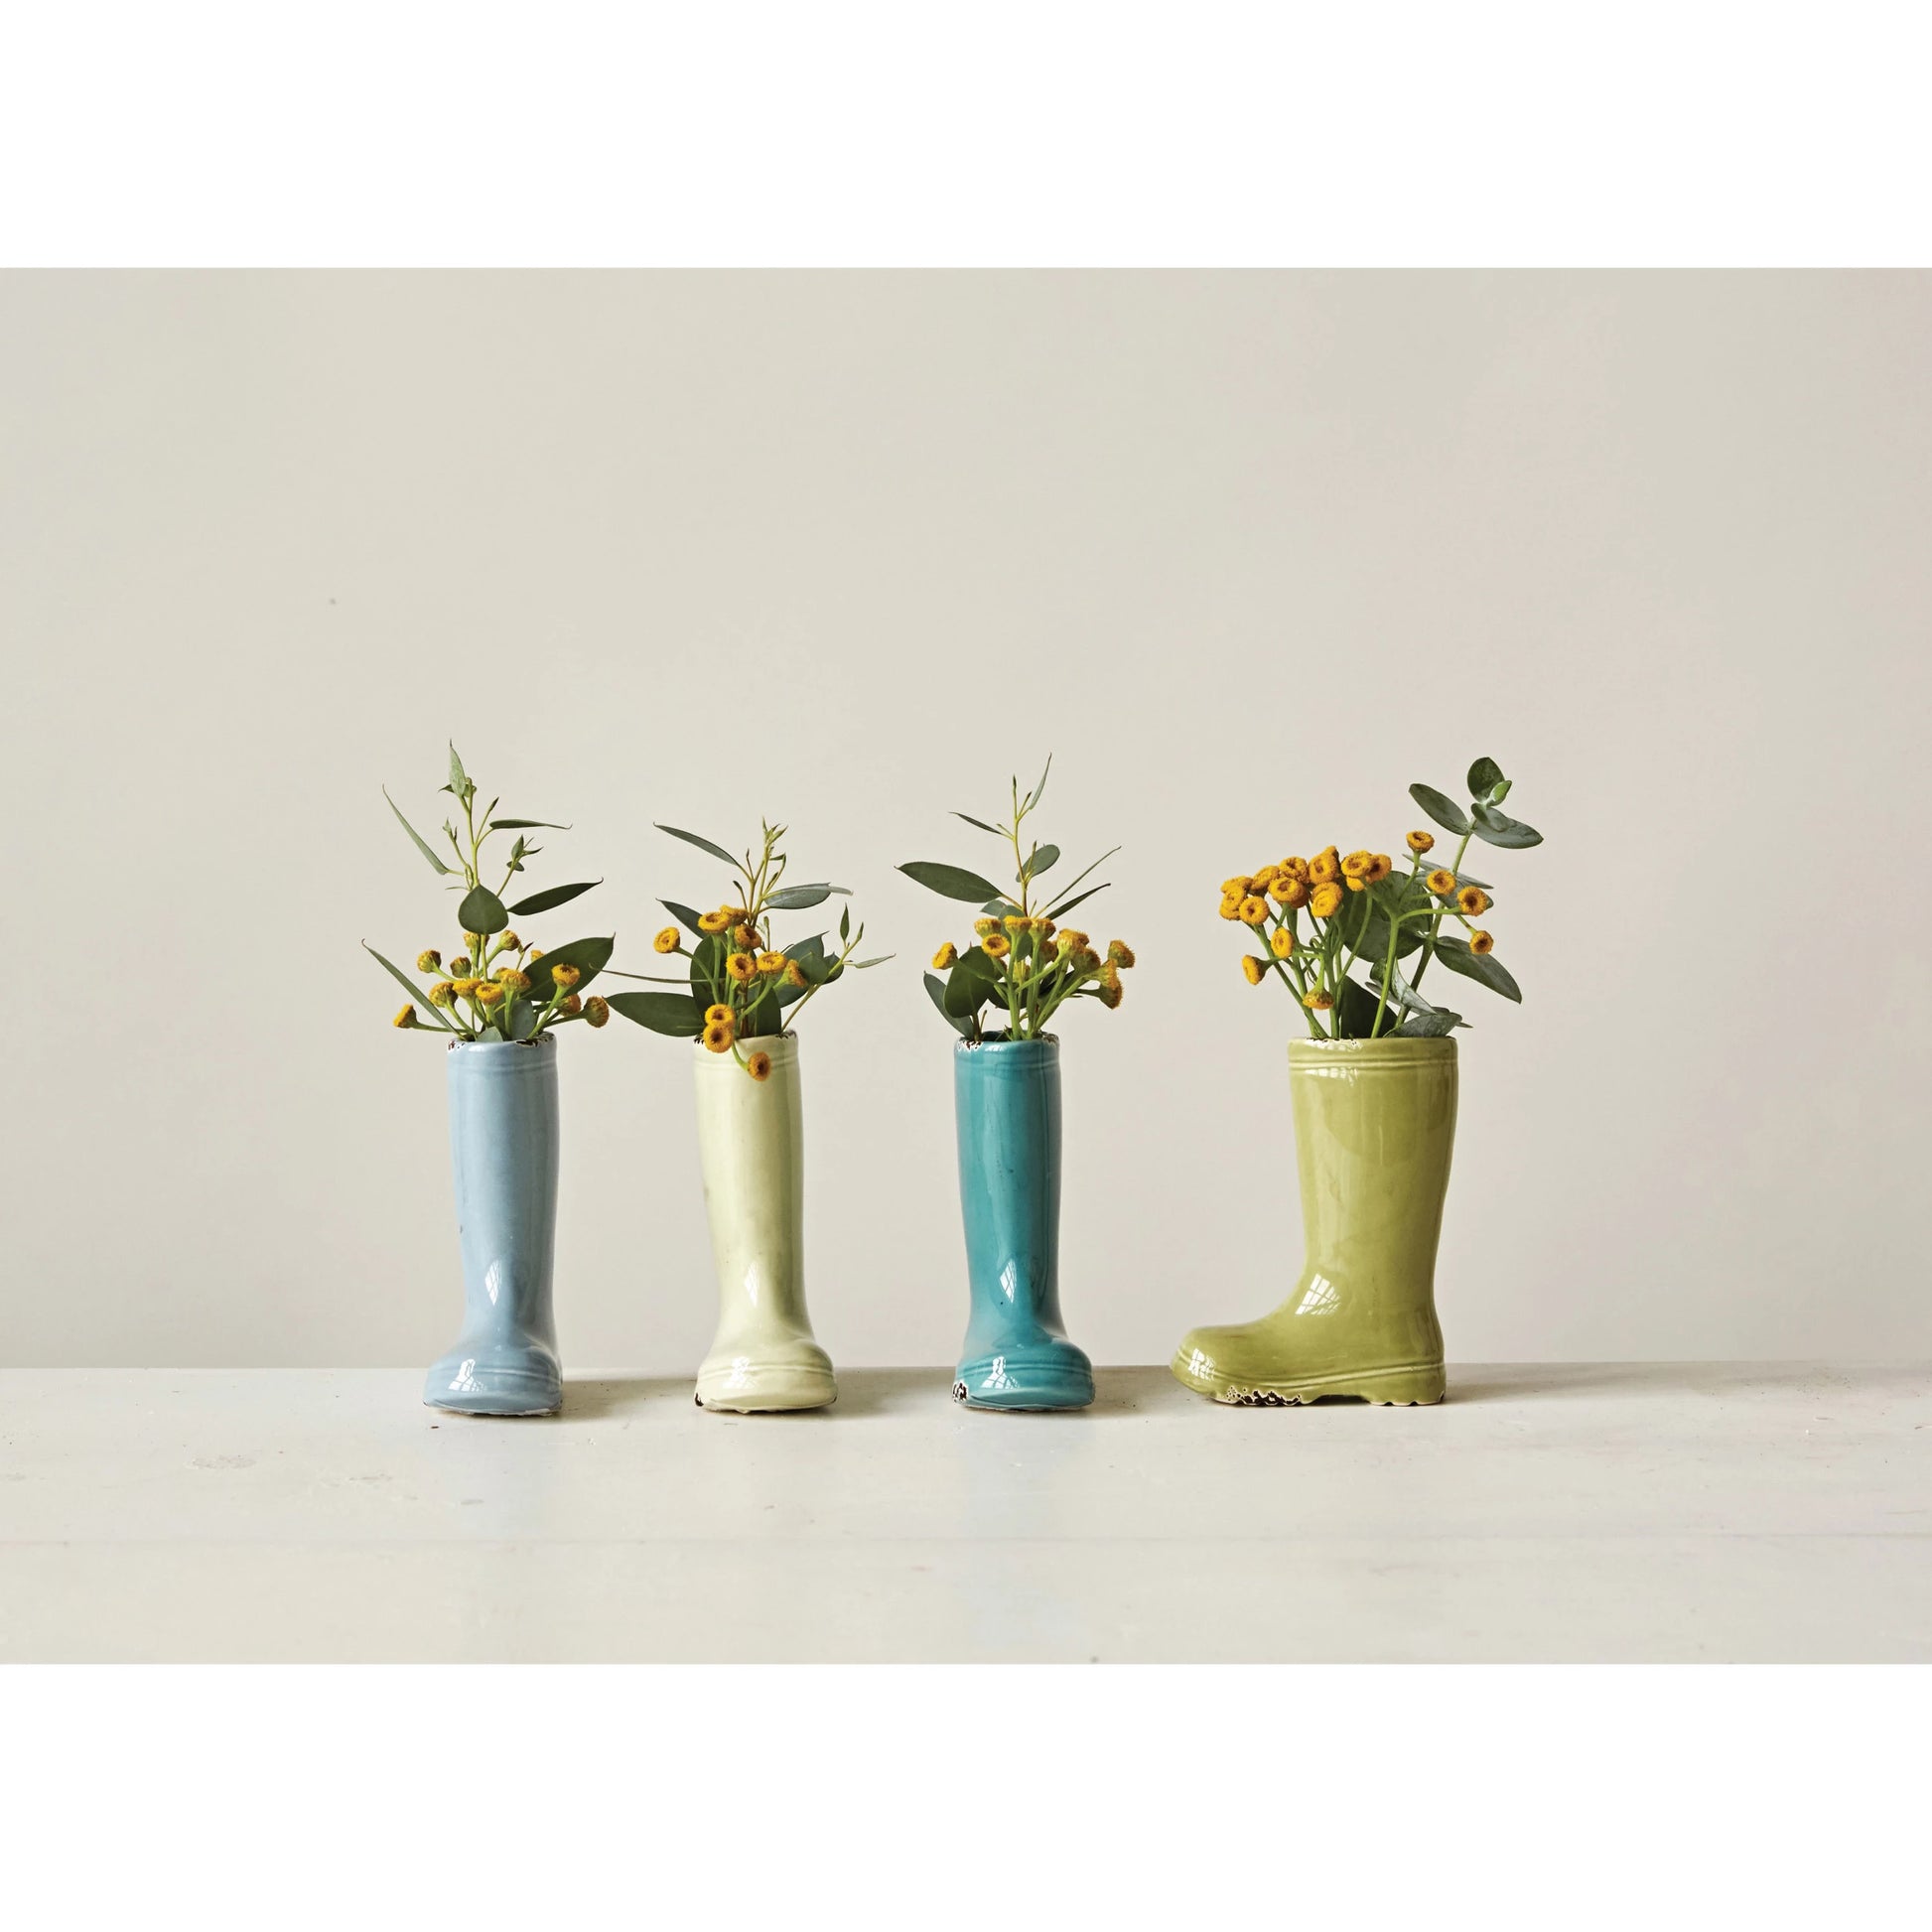 4 cilors of petite boot vase with small yellow flower sin them on a beige back ground.